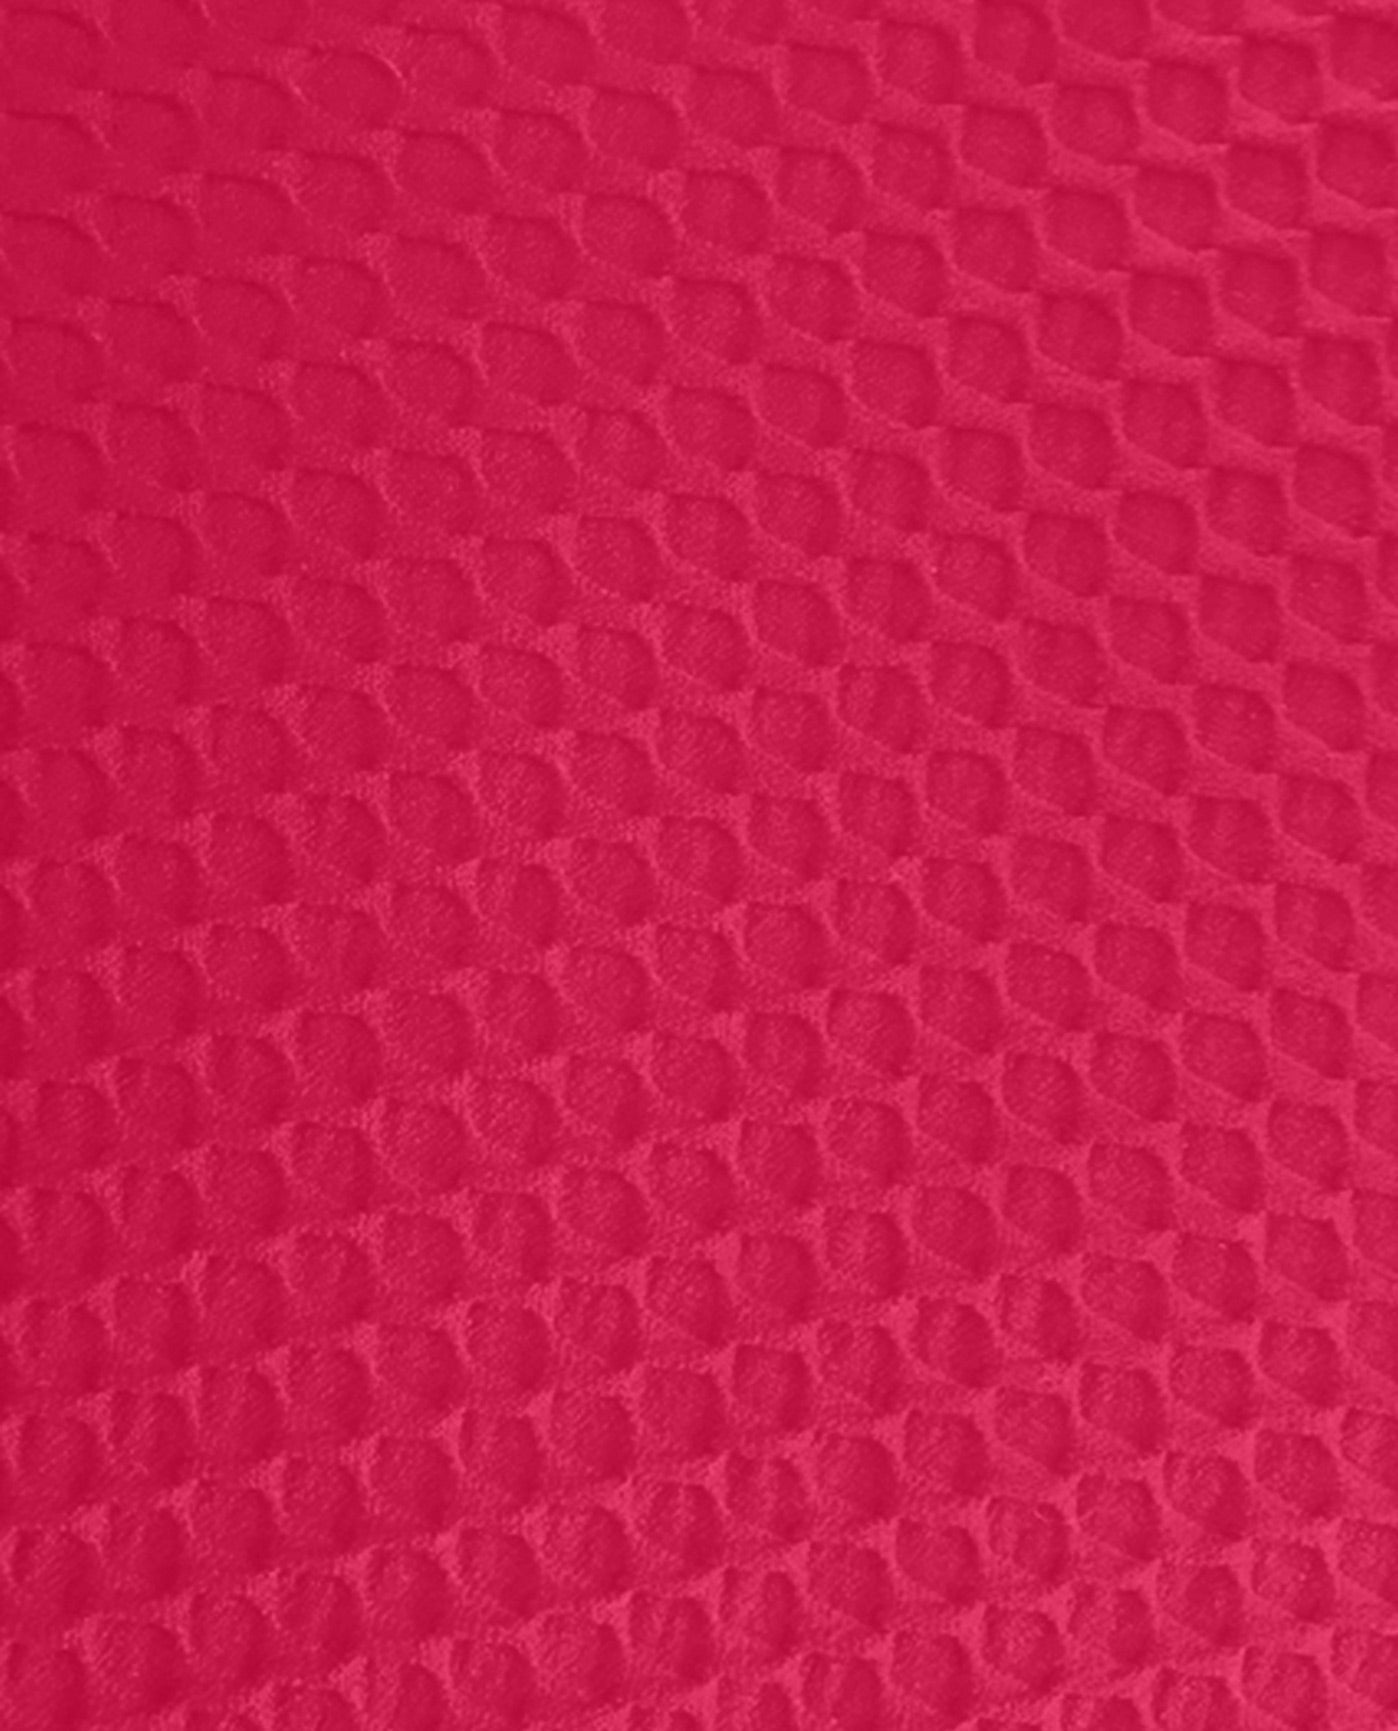 FABRIC SWATCH VIEW OF CHLORINE RESISTANT AQUAMORE COLOR BLOCK TEXTURED HIGH NECK PLUS SIZE SWIMSUIT | 611 AQT TEXTURED RASPBERRY